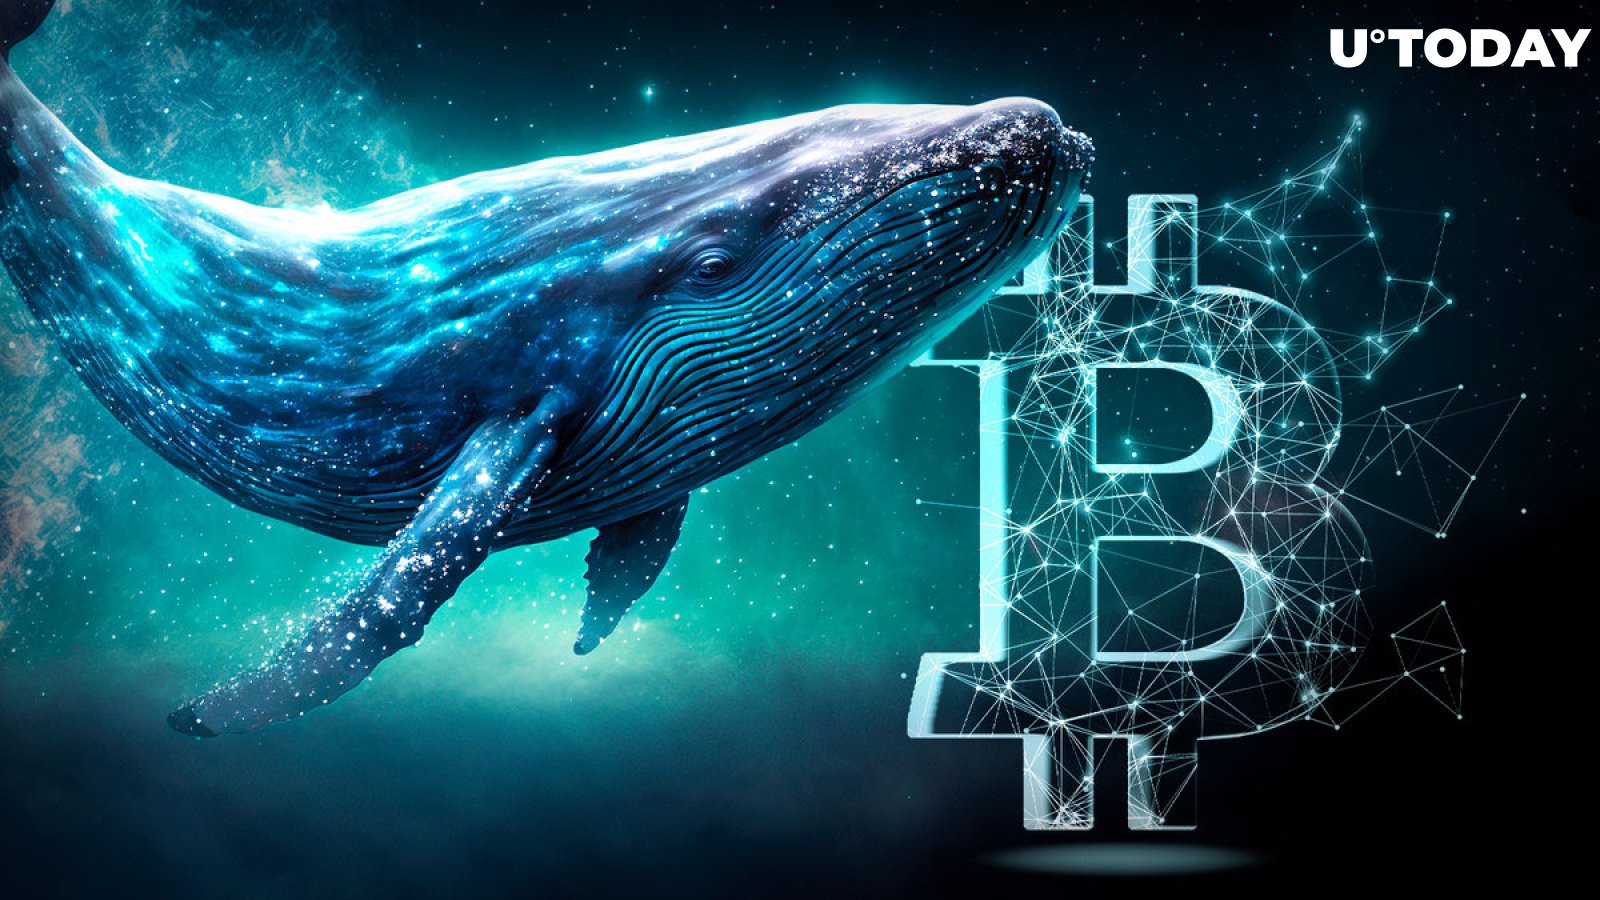 Former Bitcoin Whales Suddenly Wake Up After 10.7 Years With 49,274.2% Gain